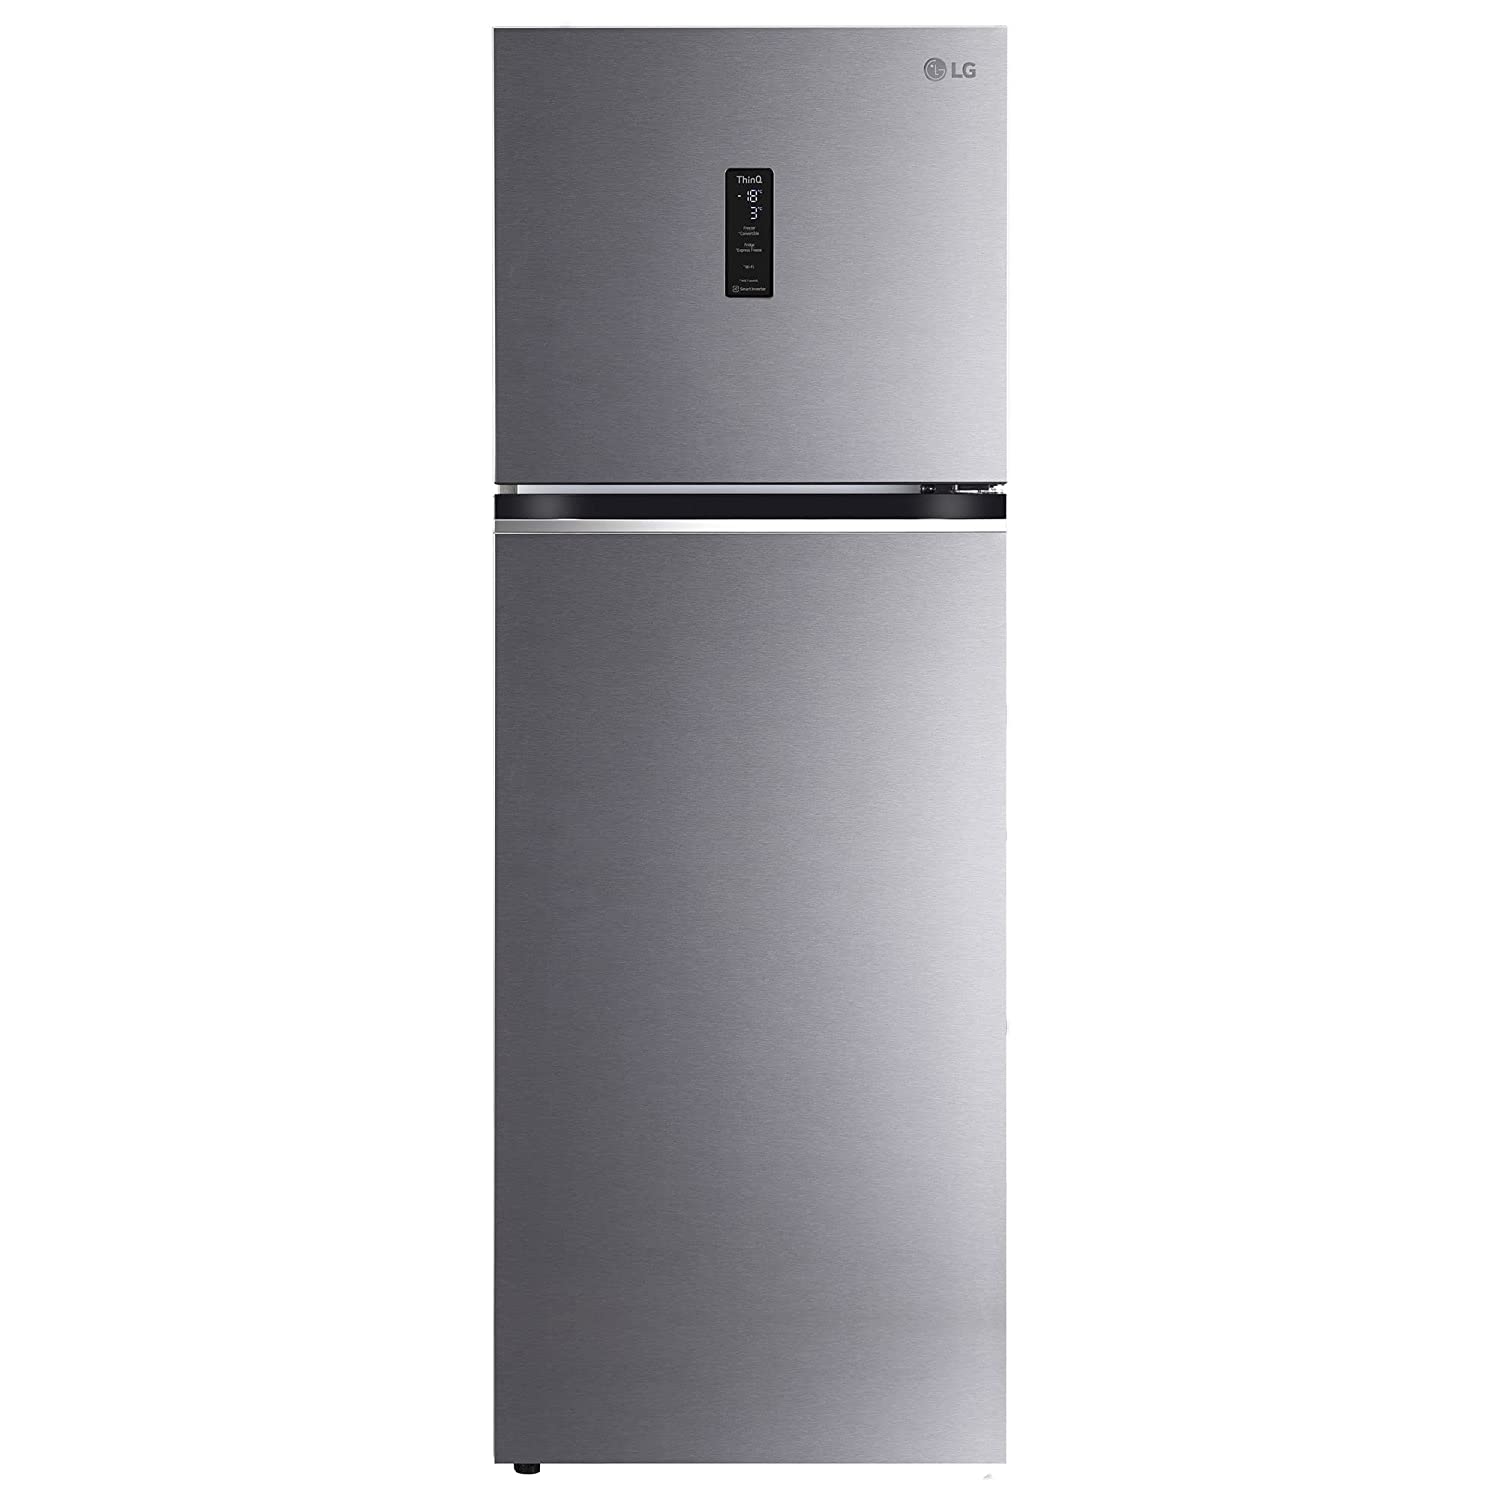 The Ultimate Guide to LG Double Door Refrigerators: Features, Benefits, and Reviews